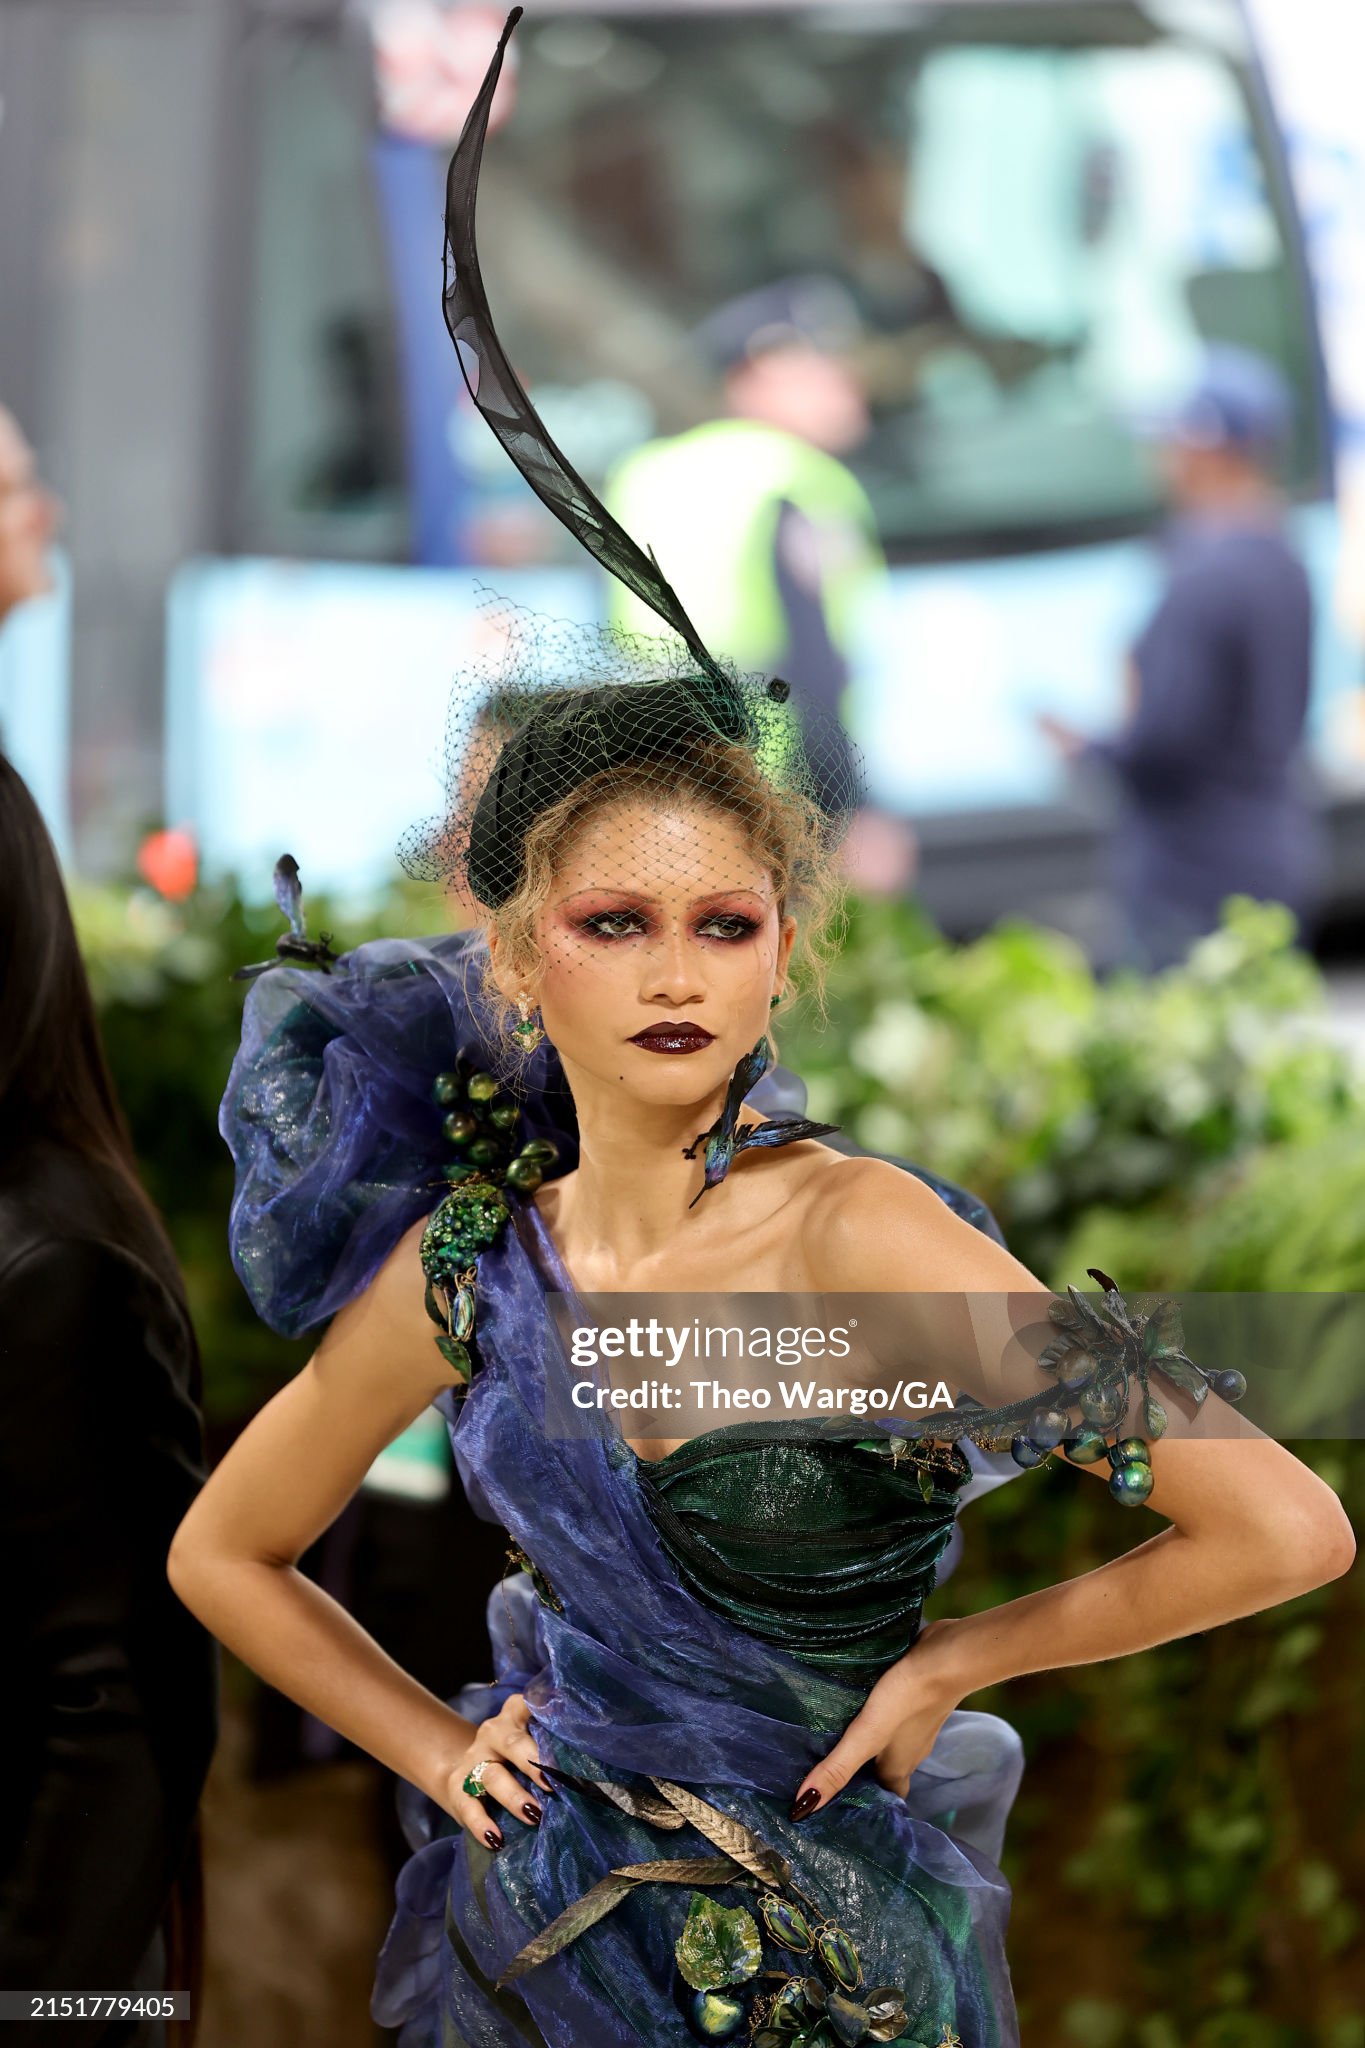 gettyimages-2151779405-2048x2048.jpg